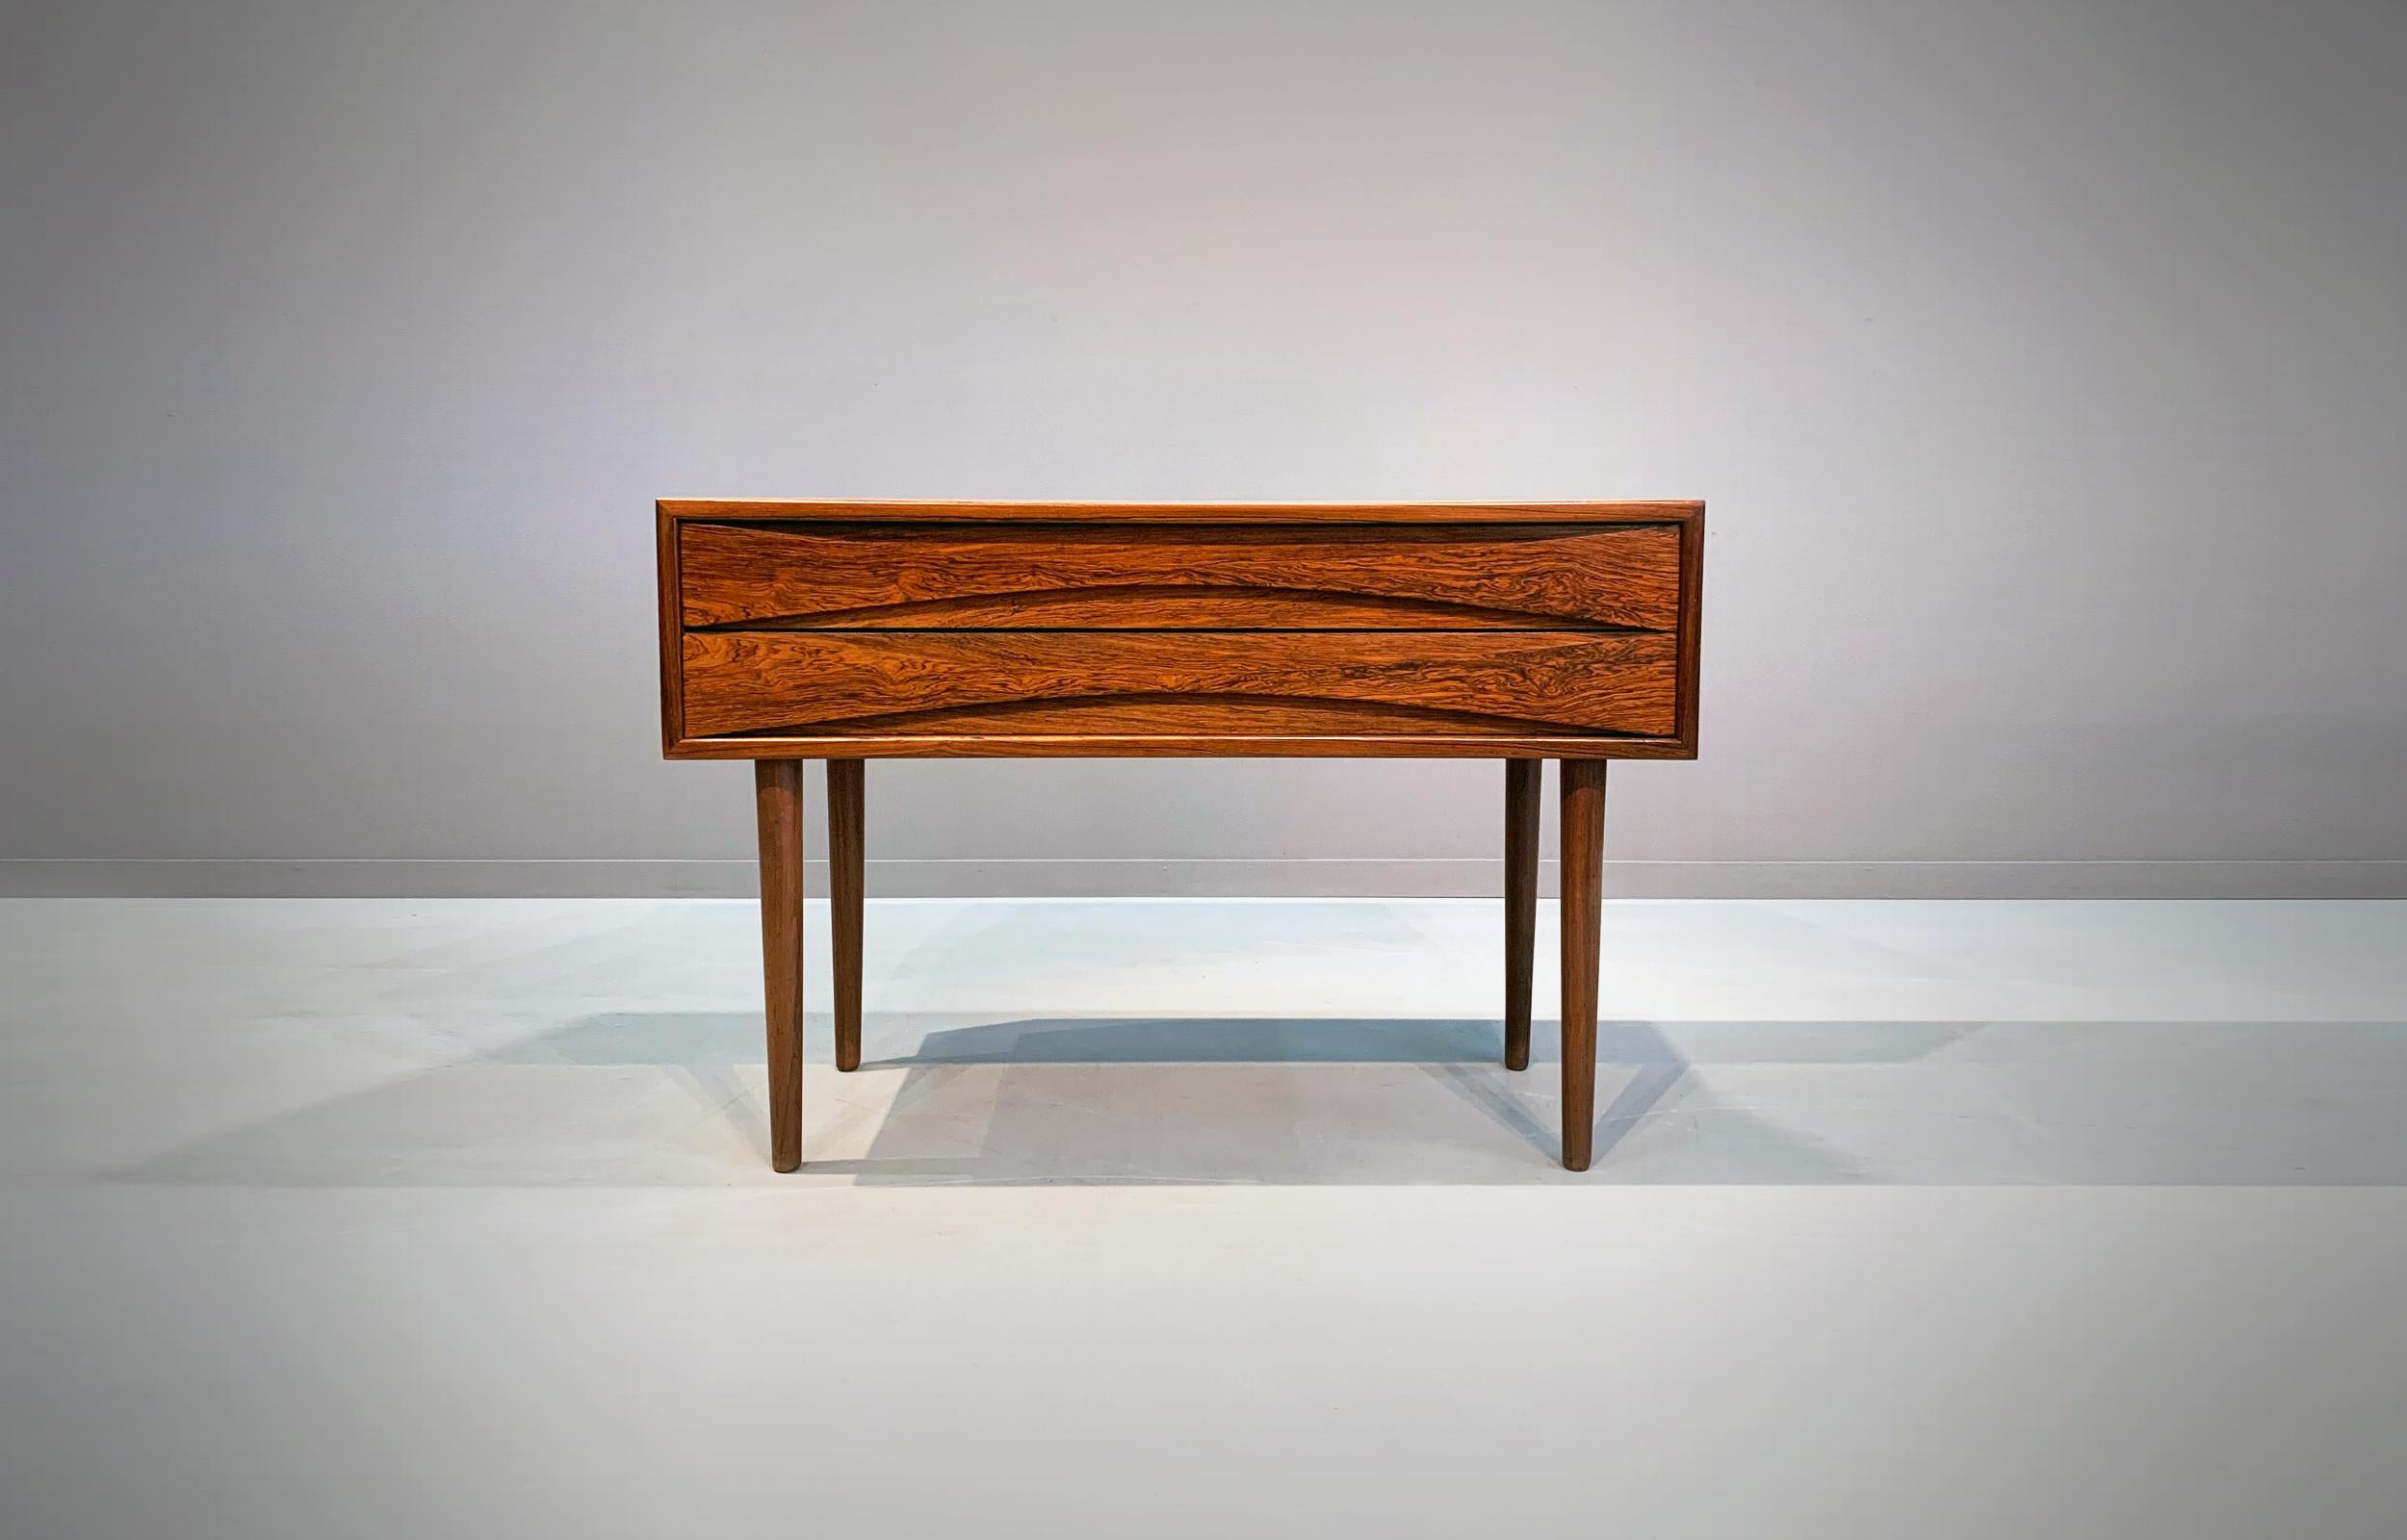 Arne Vodder rosewood cabinet drawer Denmark 1960 modern vintage.

Beautiful cabinet / chest of drawers designed by Arne Vodder and produced by Sibast / Niels Clausen, Denmark in the 1960s. Wonderful grained / structured rosewood. A midcentury